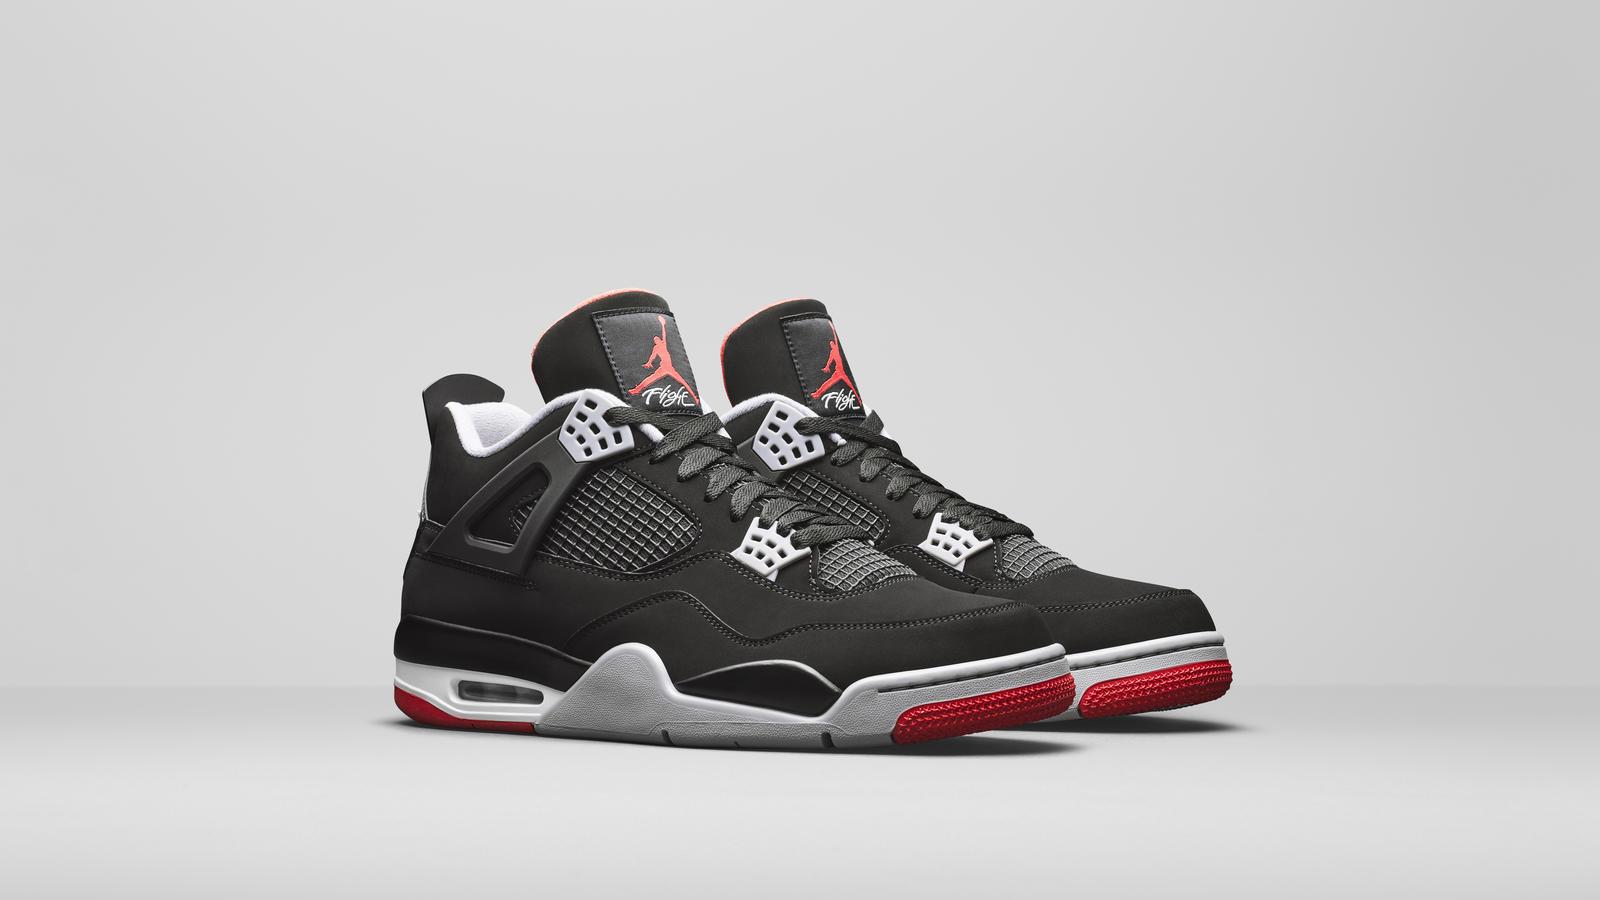 Air Jordan 4 Bred Official Image and Release Date